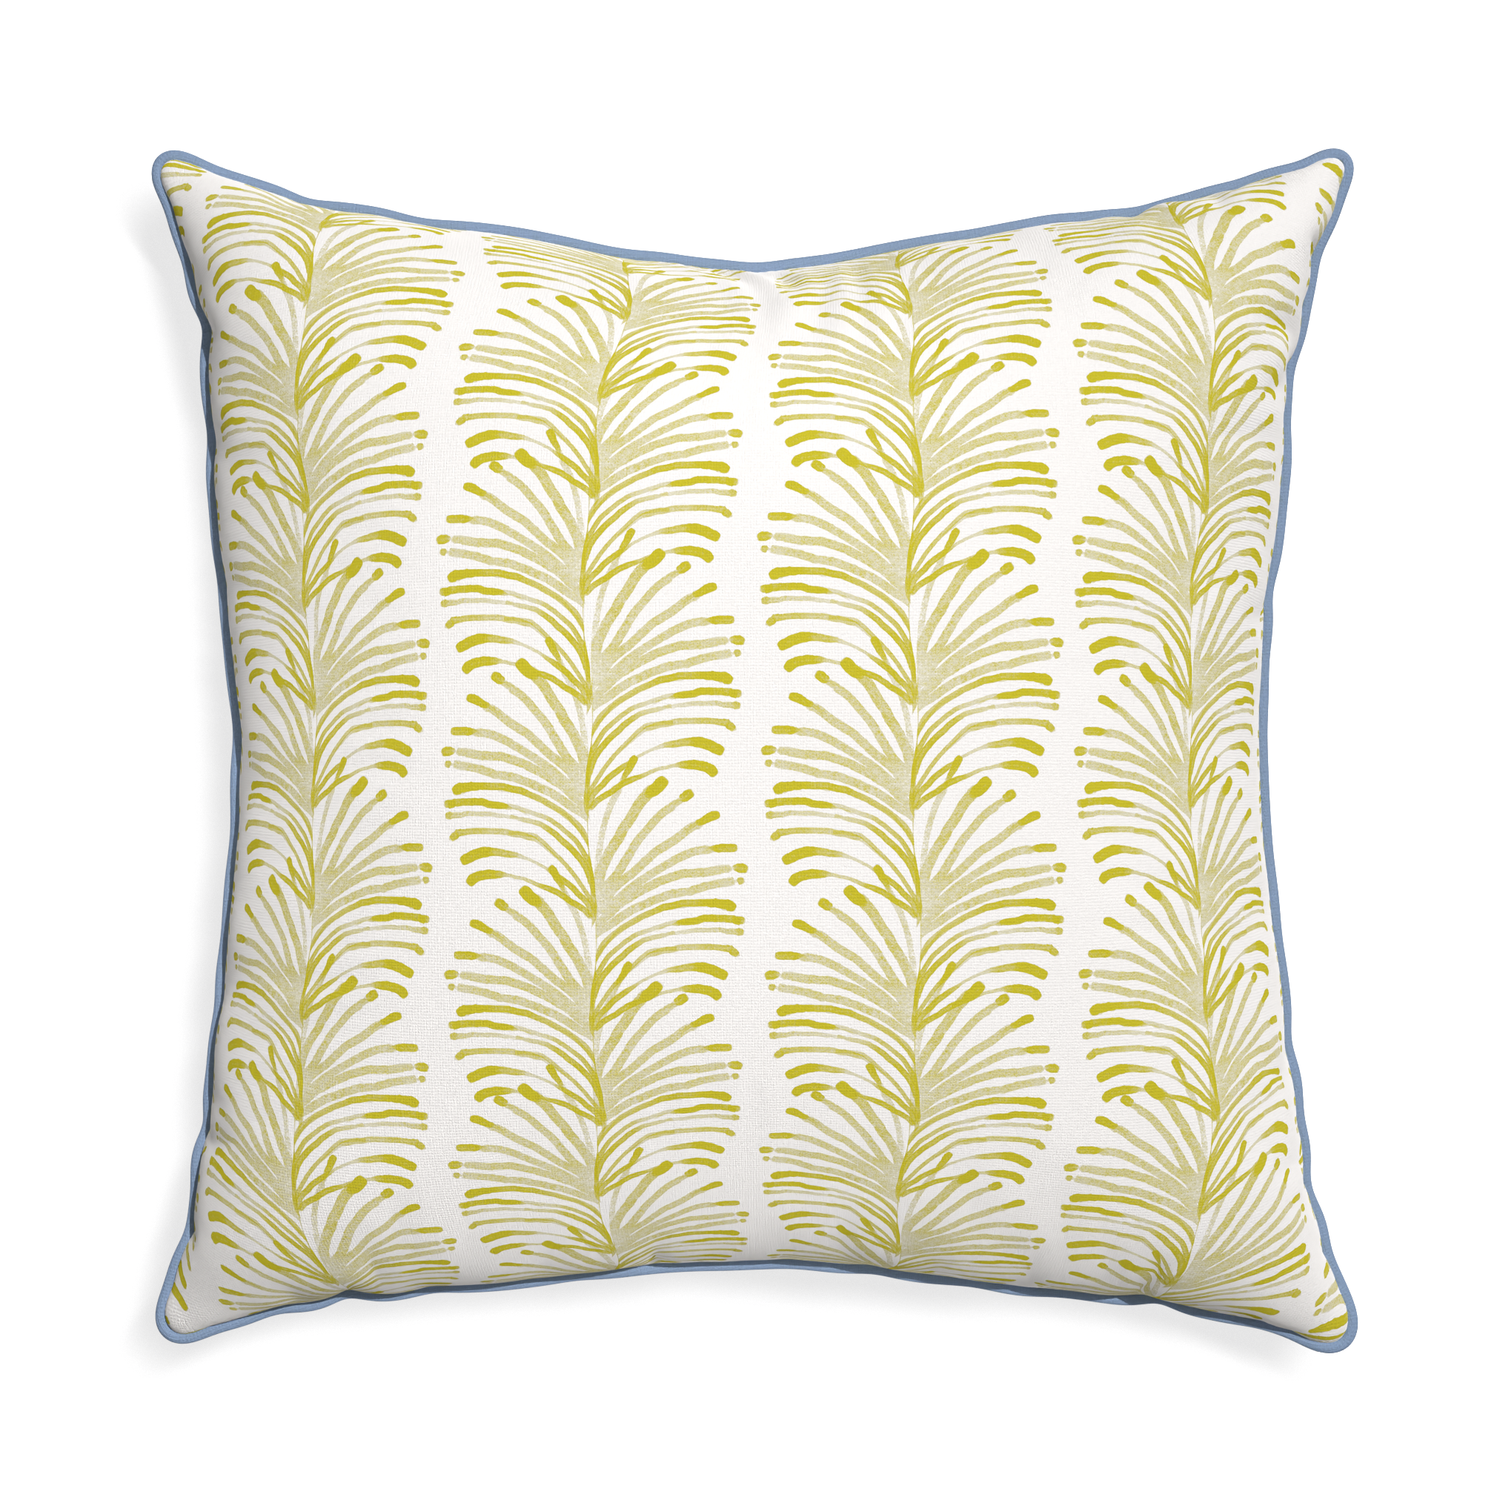 Euro-sham emma chartreuse custom pillow with sky piping on white background